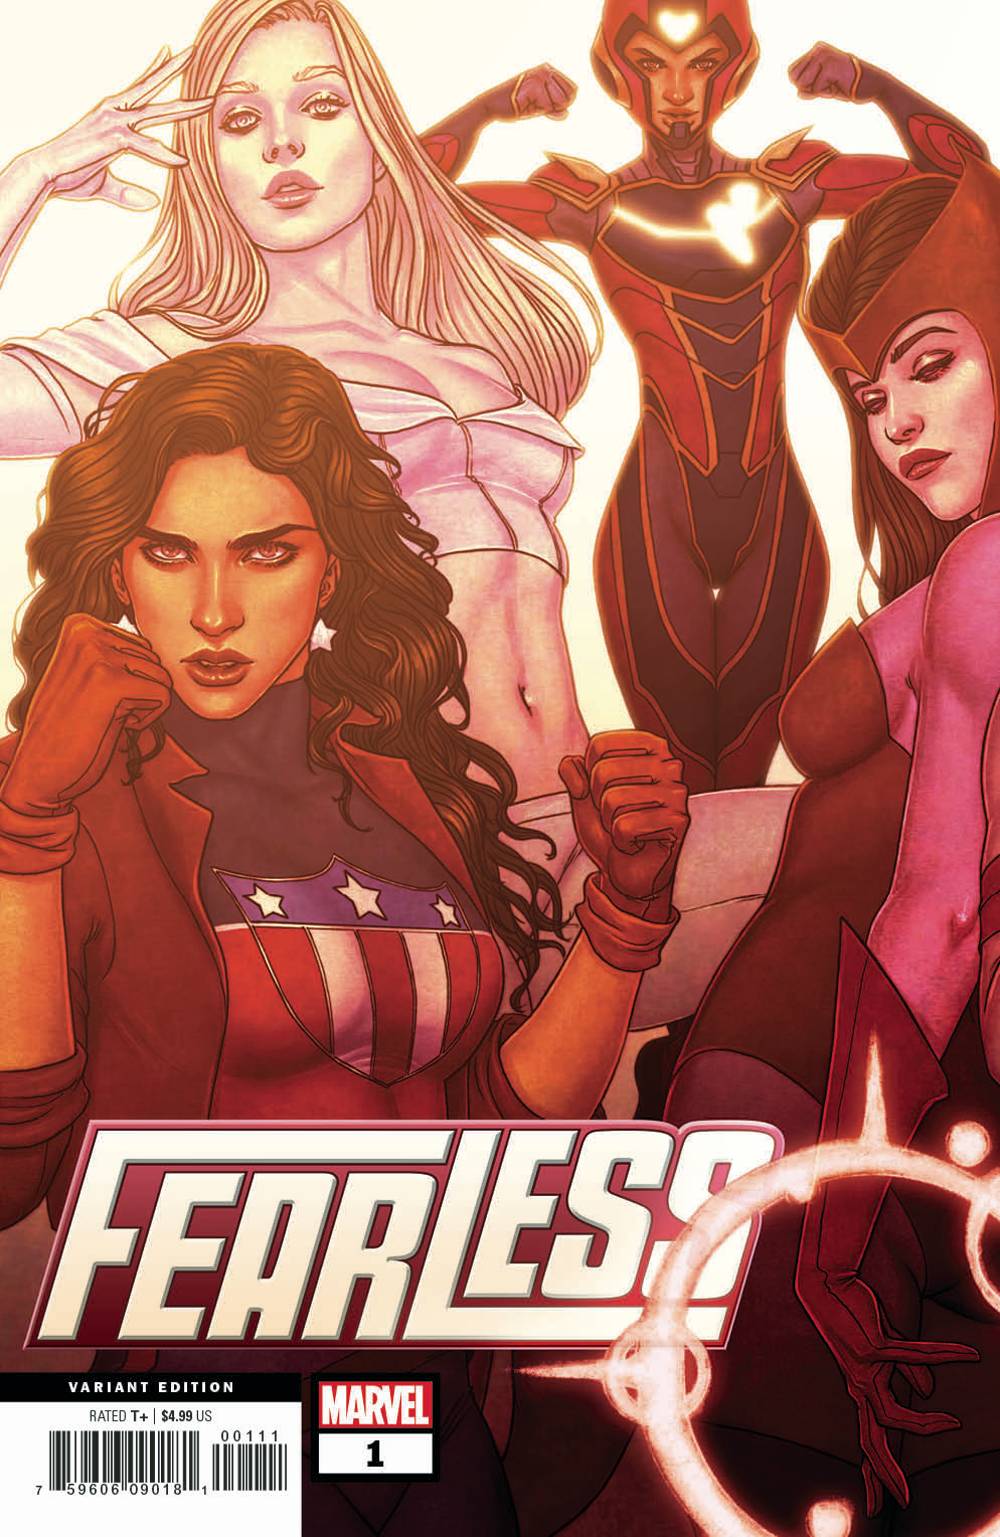 FEARLESS #1 (OF 4) FRISON CONNECTING VARIANT 07/24/19 FOC 07/01/19